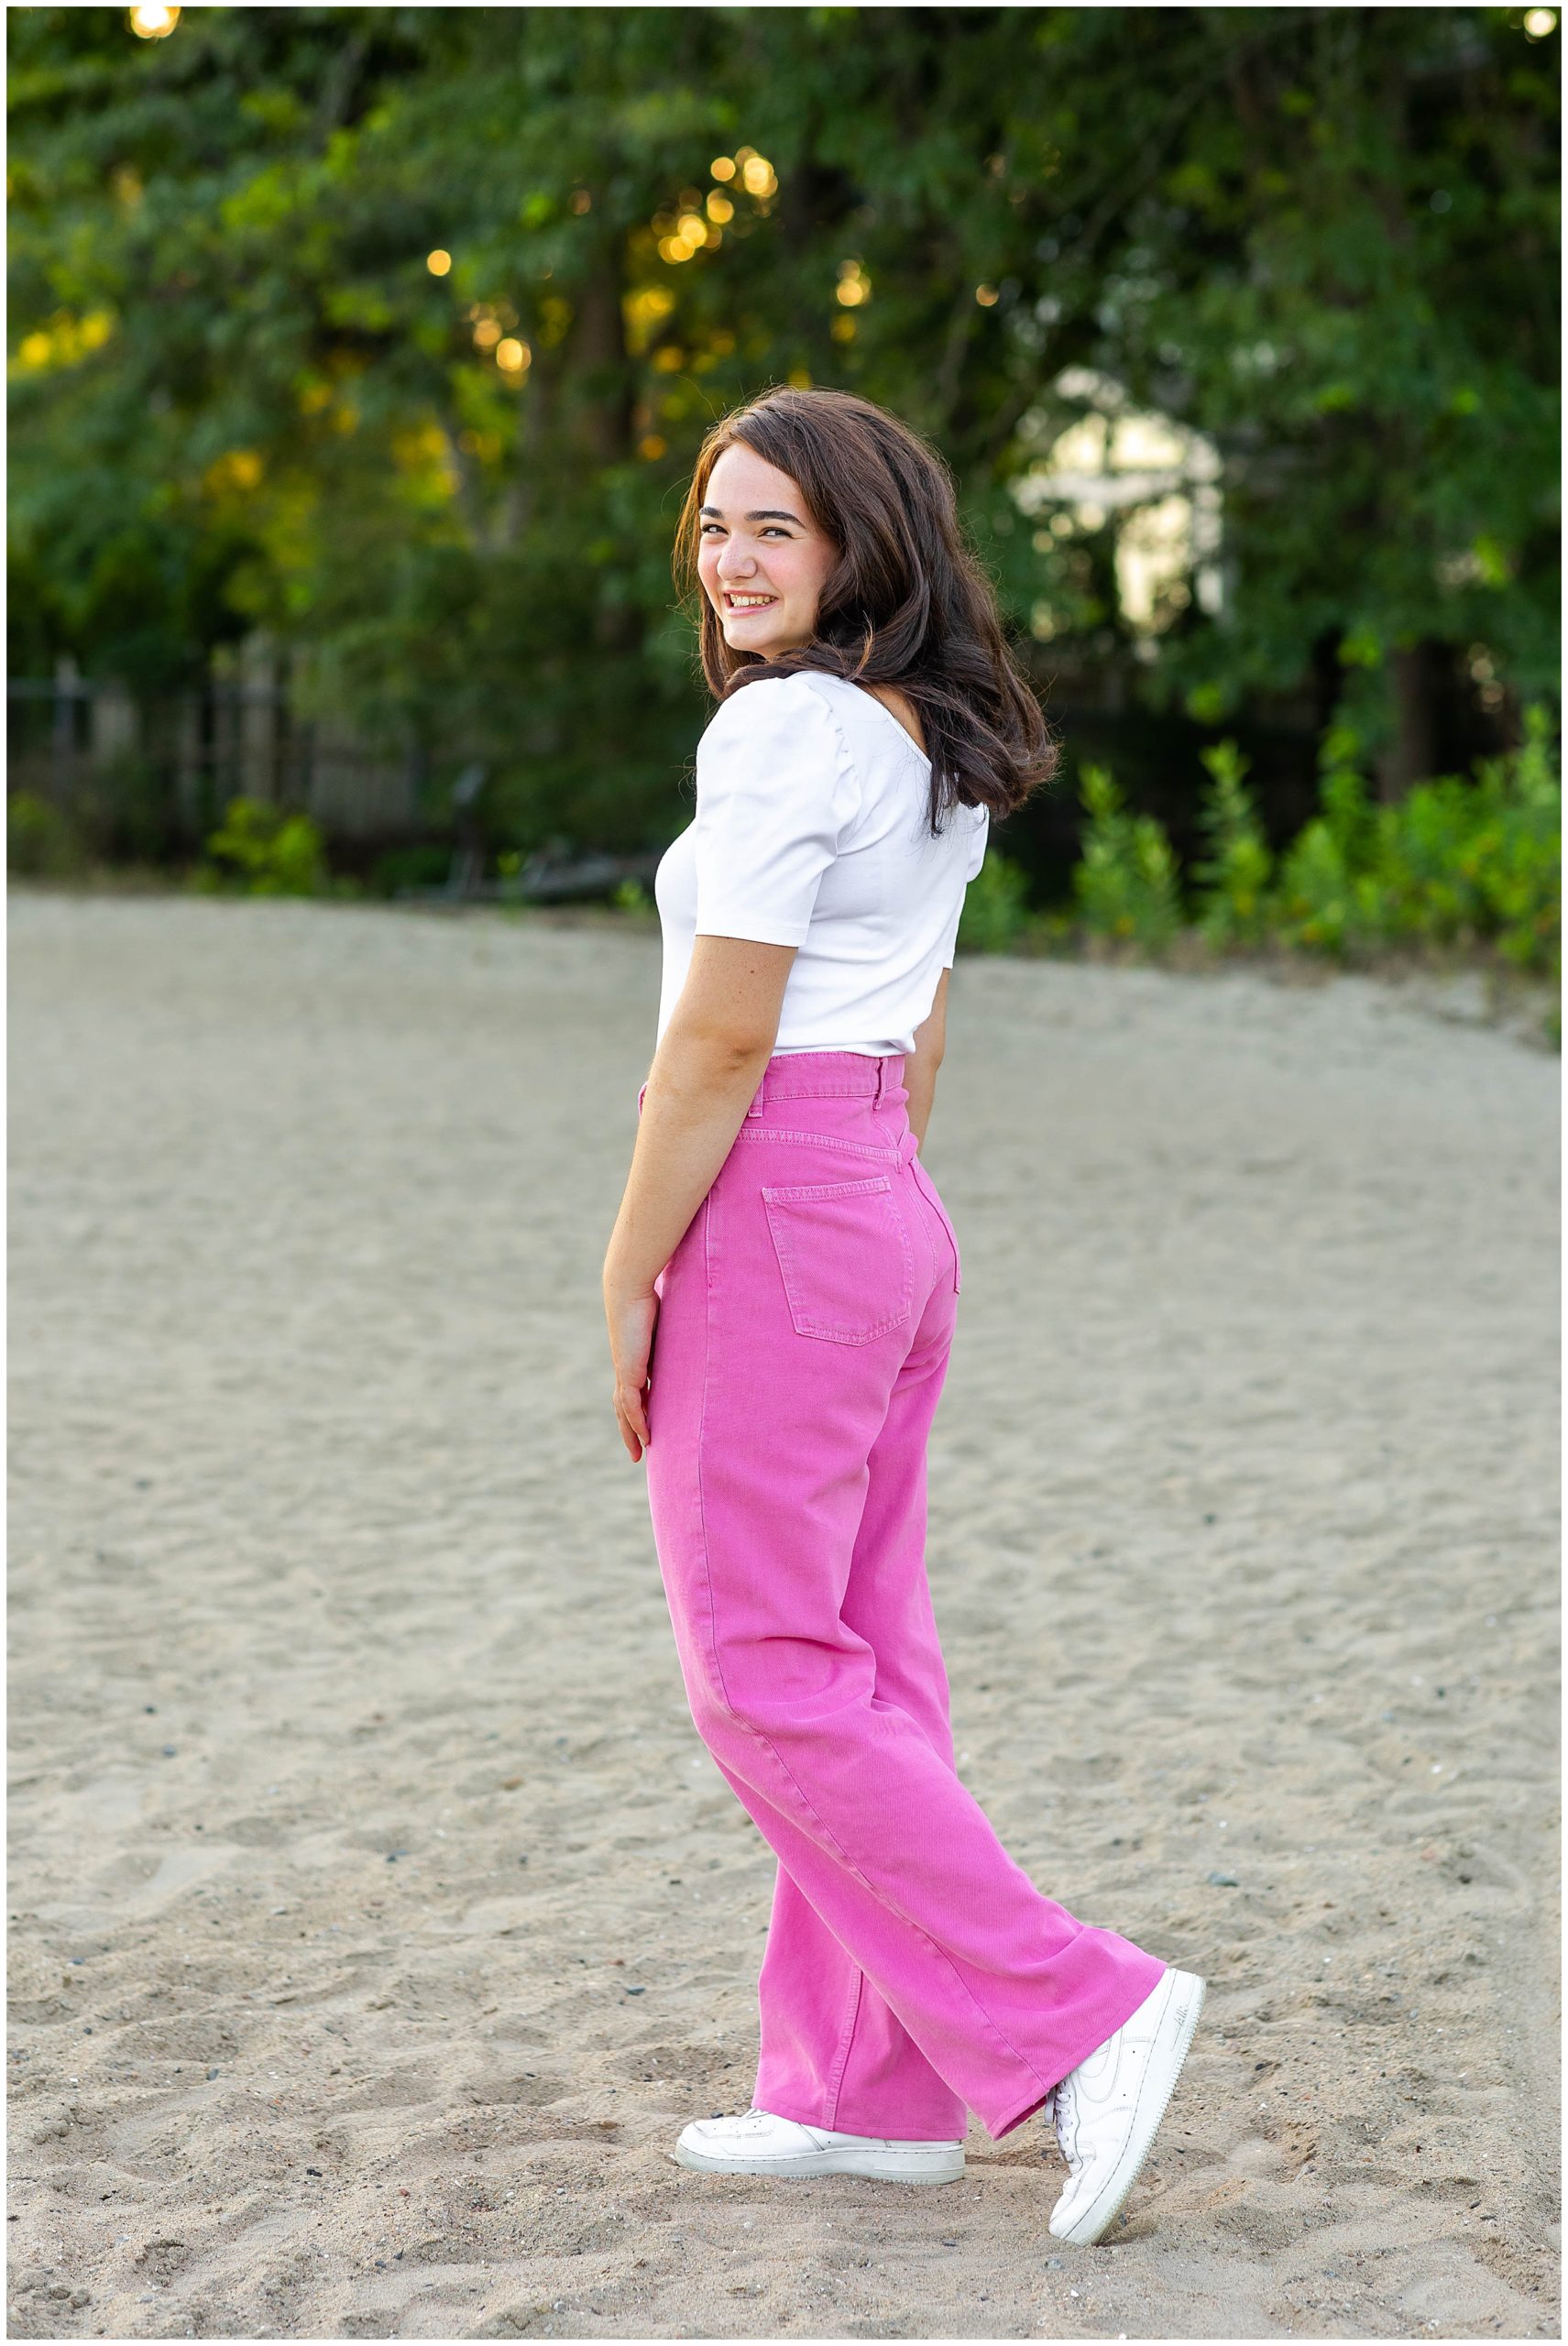 Girl in white shirt and pink pants dances in sand